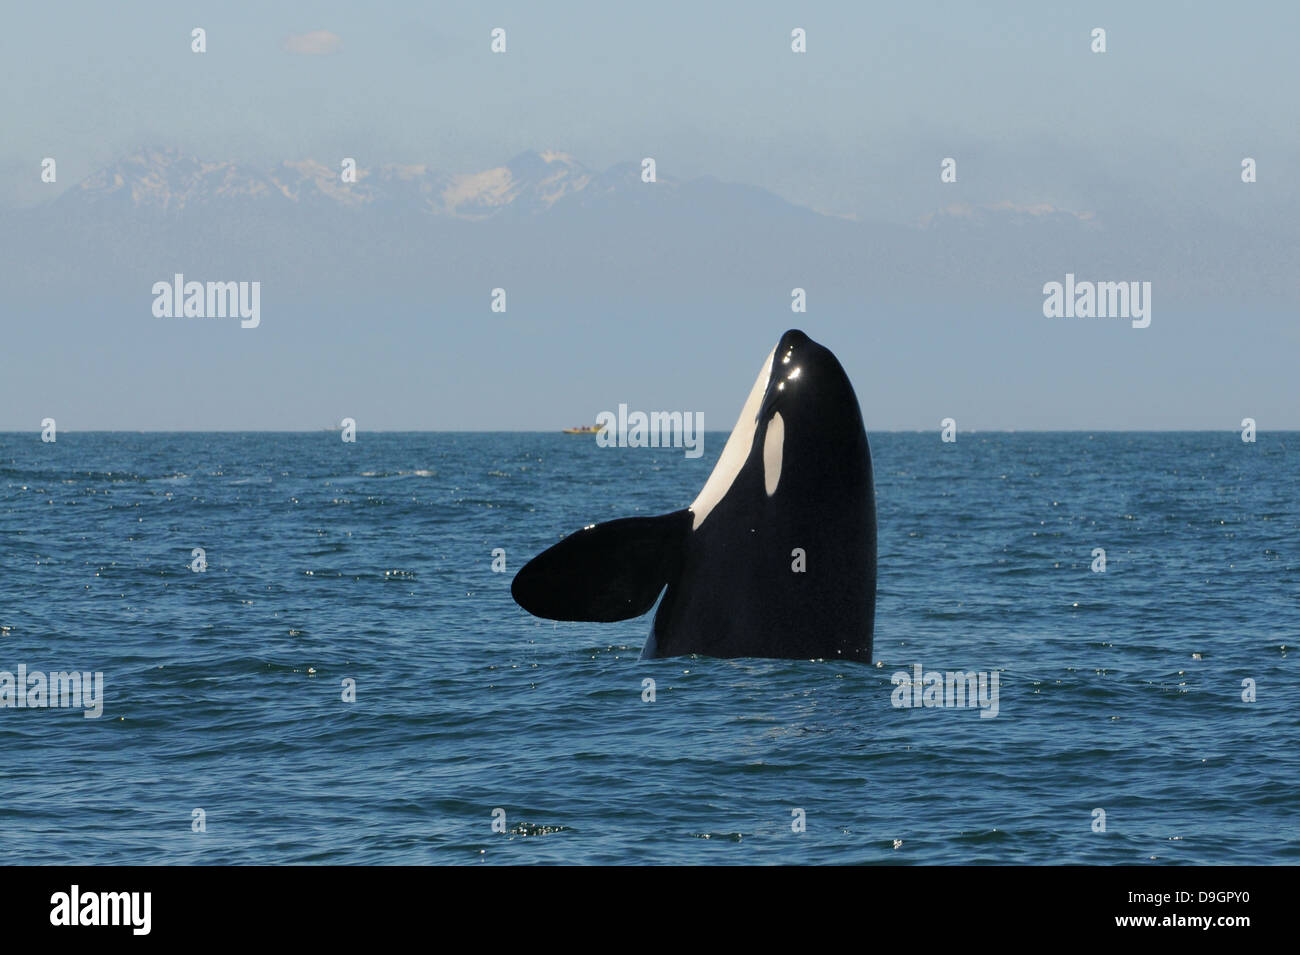 a killer whale spyhops to take a look at its surroundings, with the Olympic Mountains in the background Stock Photo